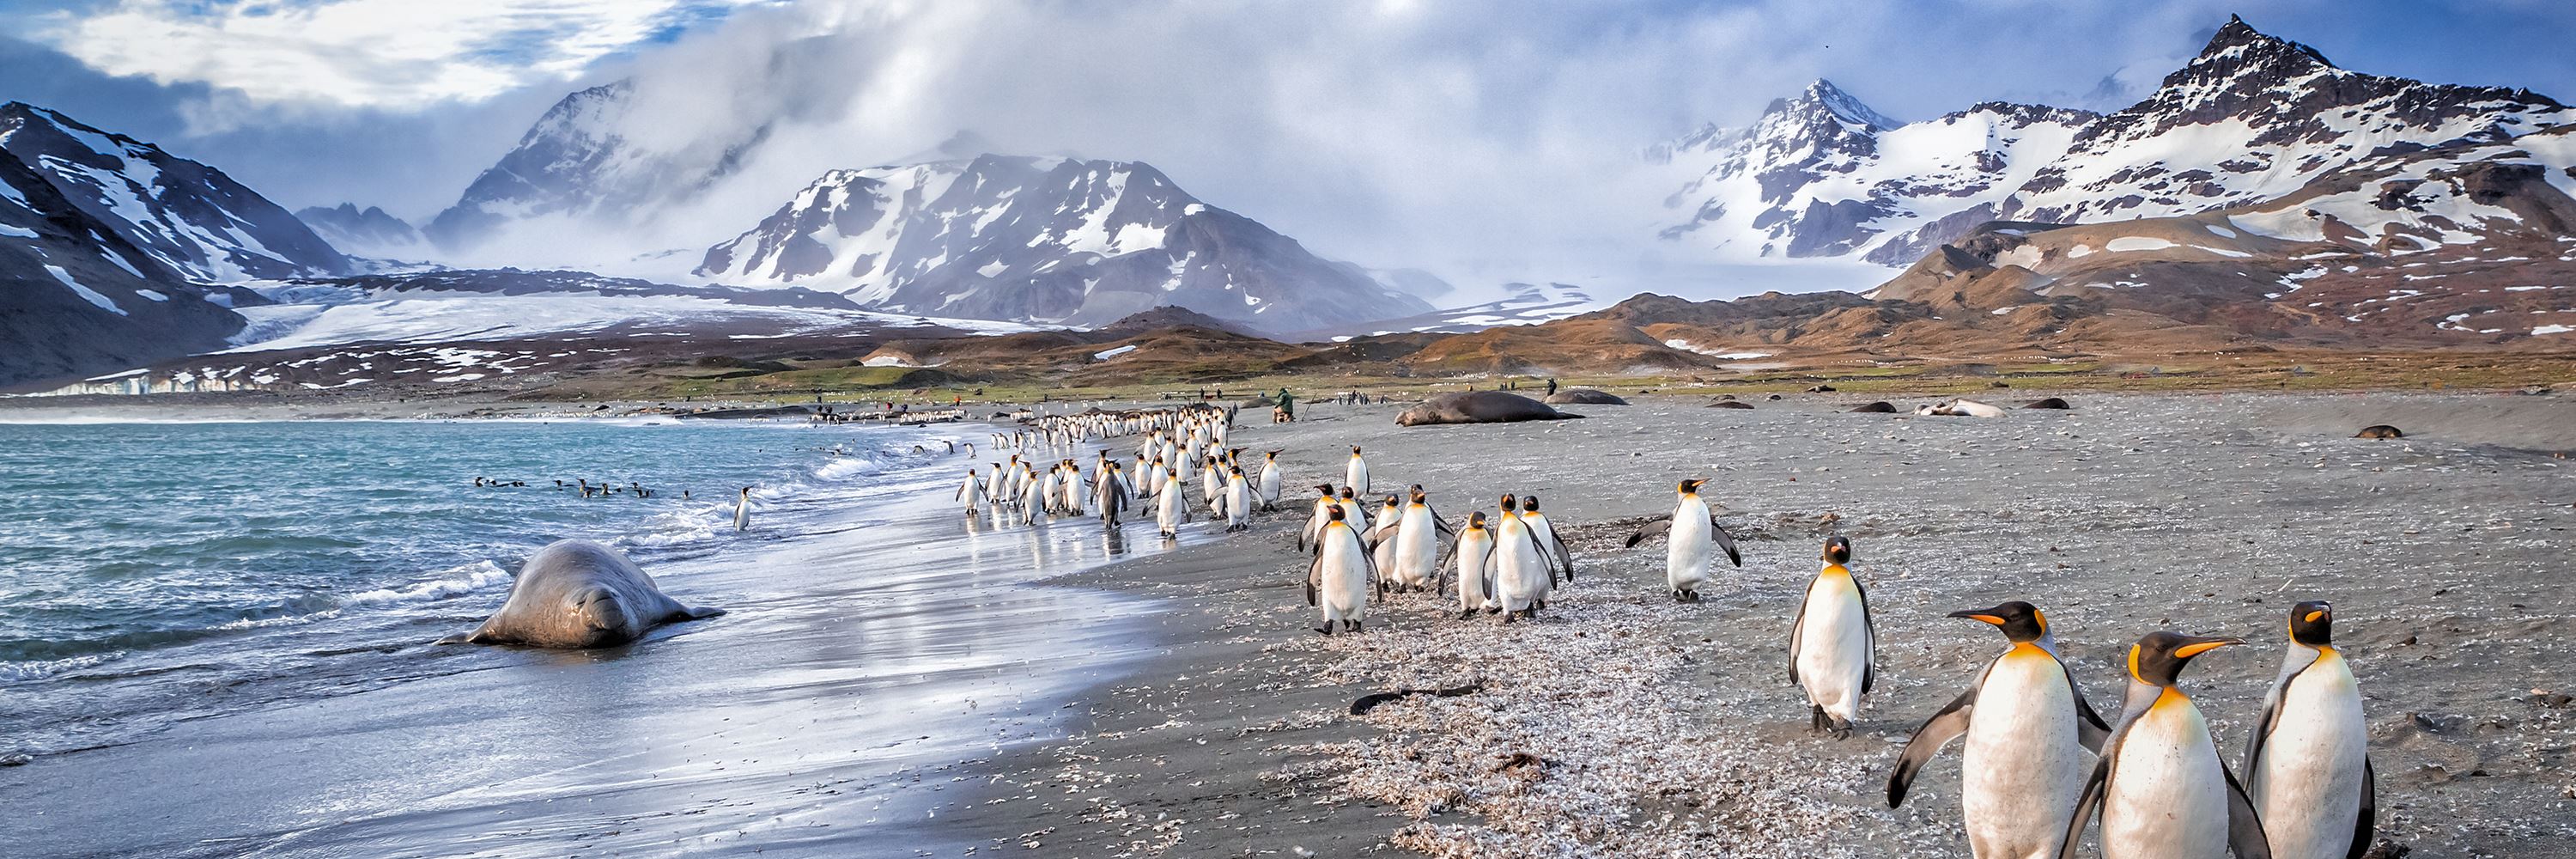 Antarctica's wildlife: penguins, whales & more | Audley Travel